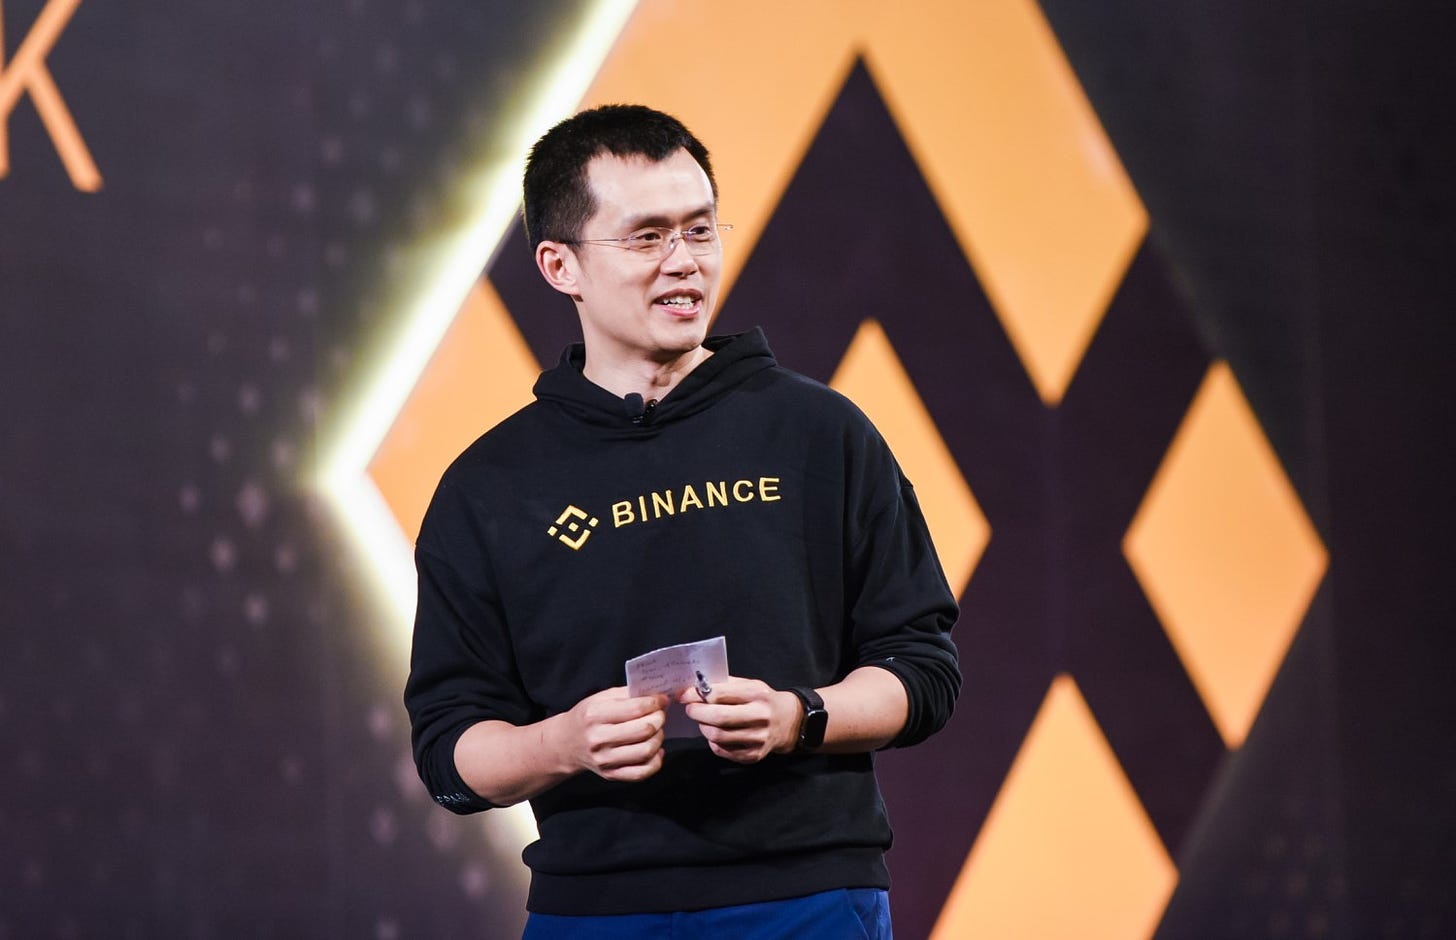 Binance Now Accepting Fiat Through Alipay, WeChat - CoinDesk